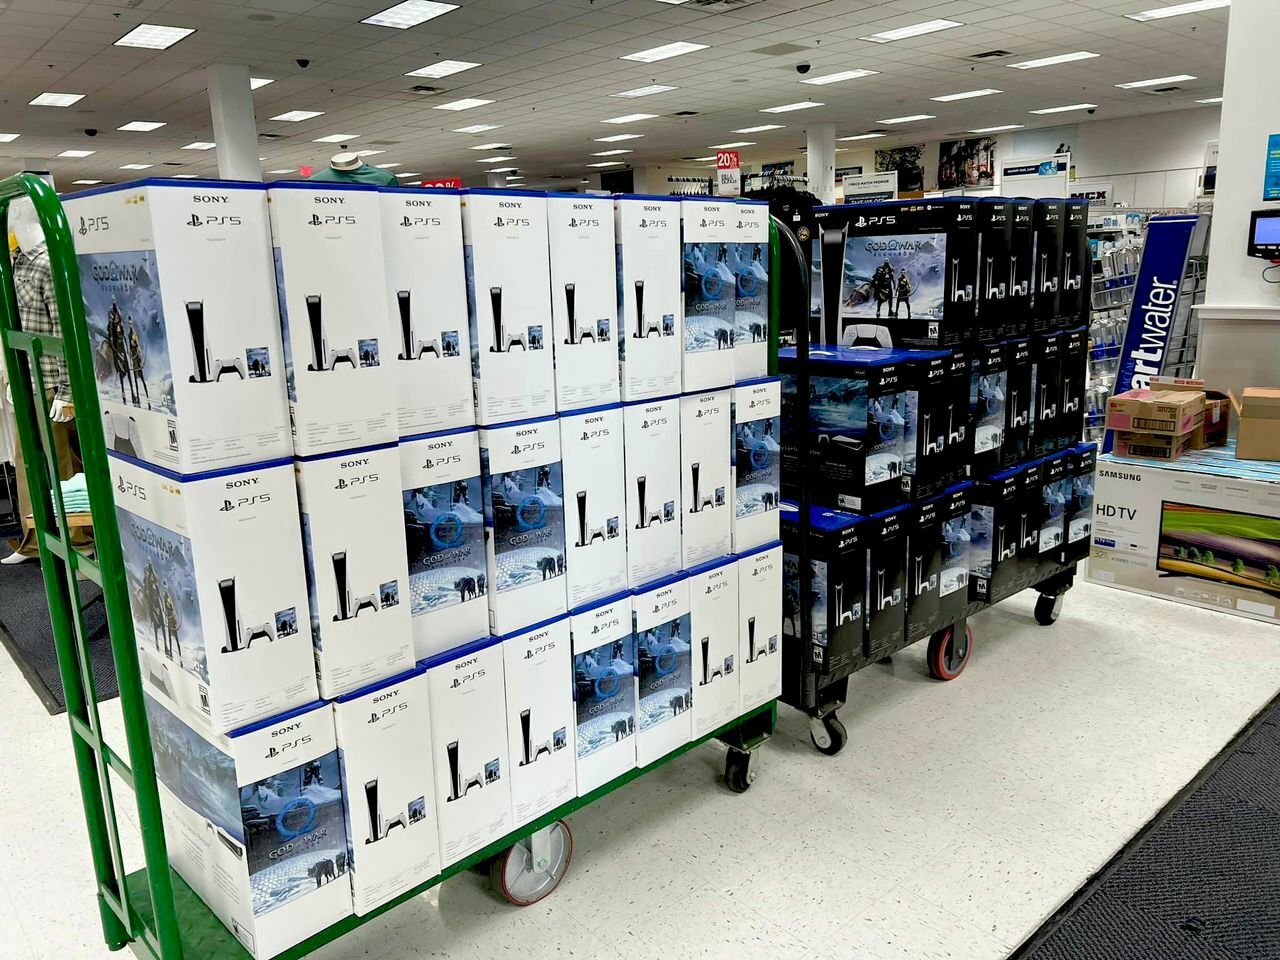 <span style="font-weight: 700;">CONSOLES</span>